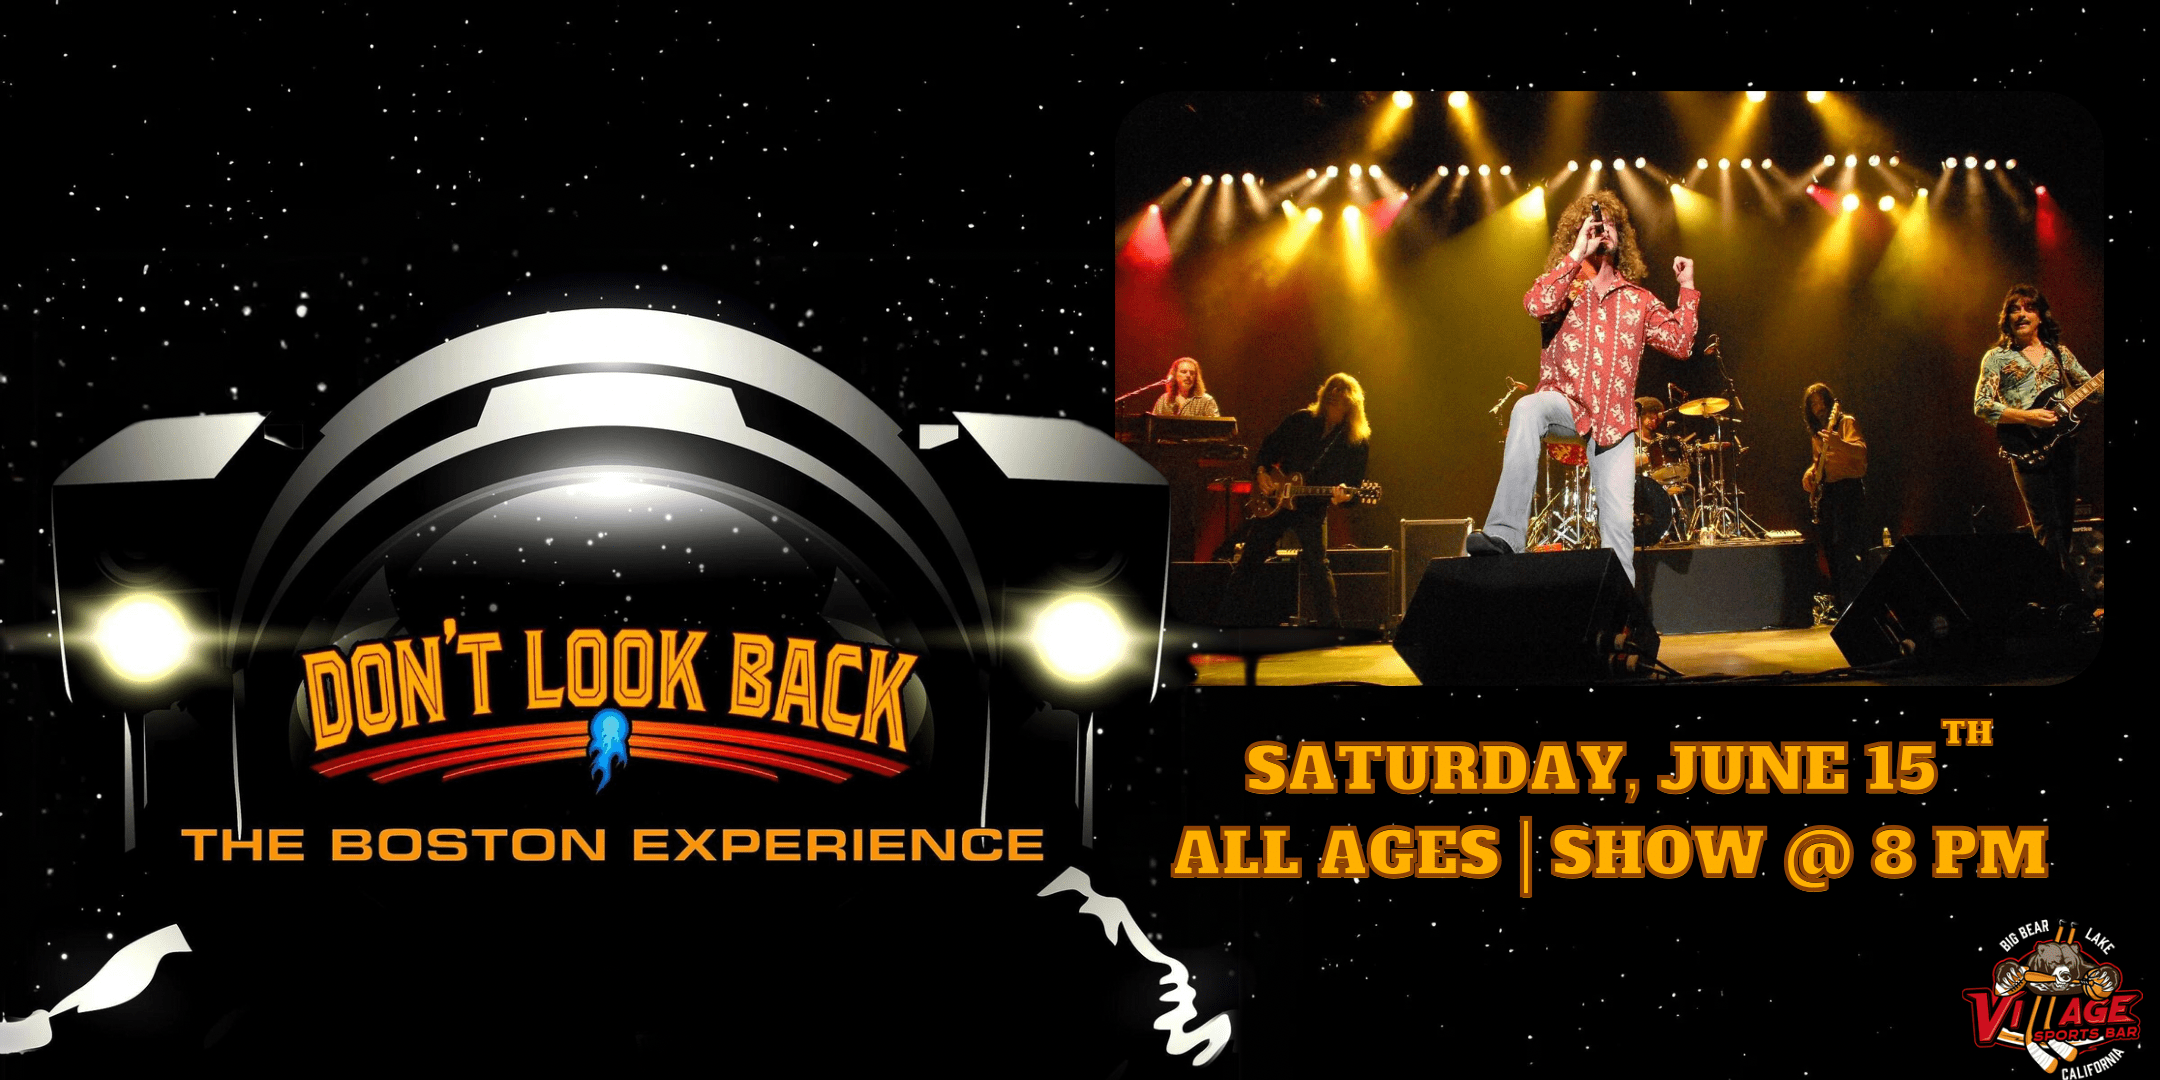 Village Sports Bar Presents: Don’t Look Back, Tribute to Boston